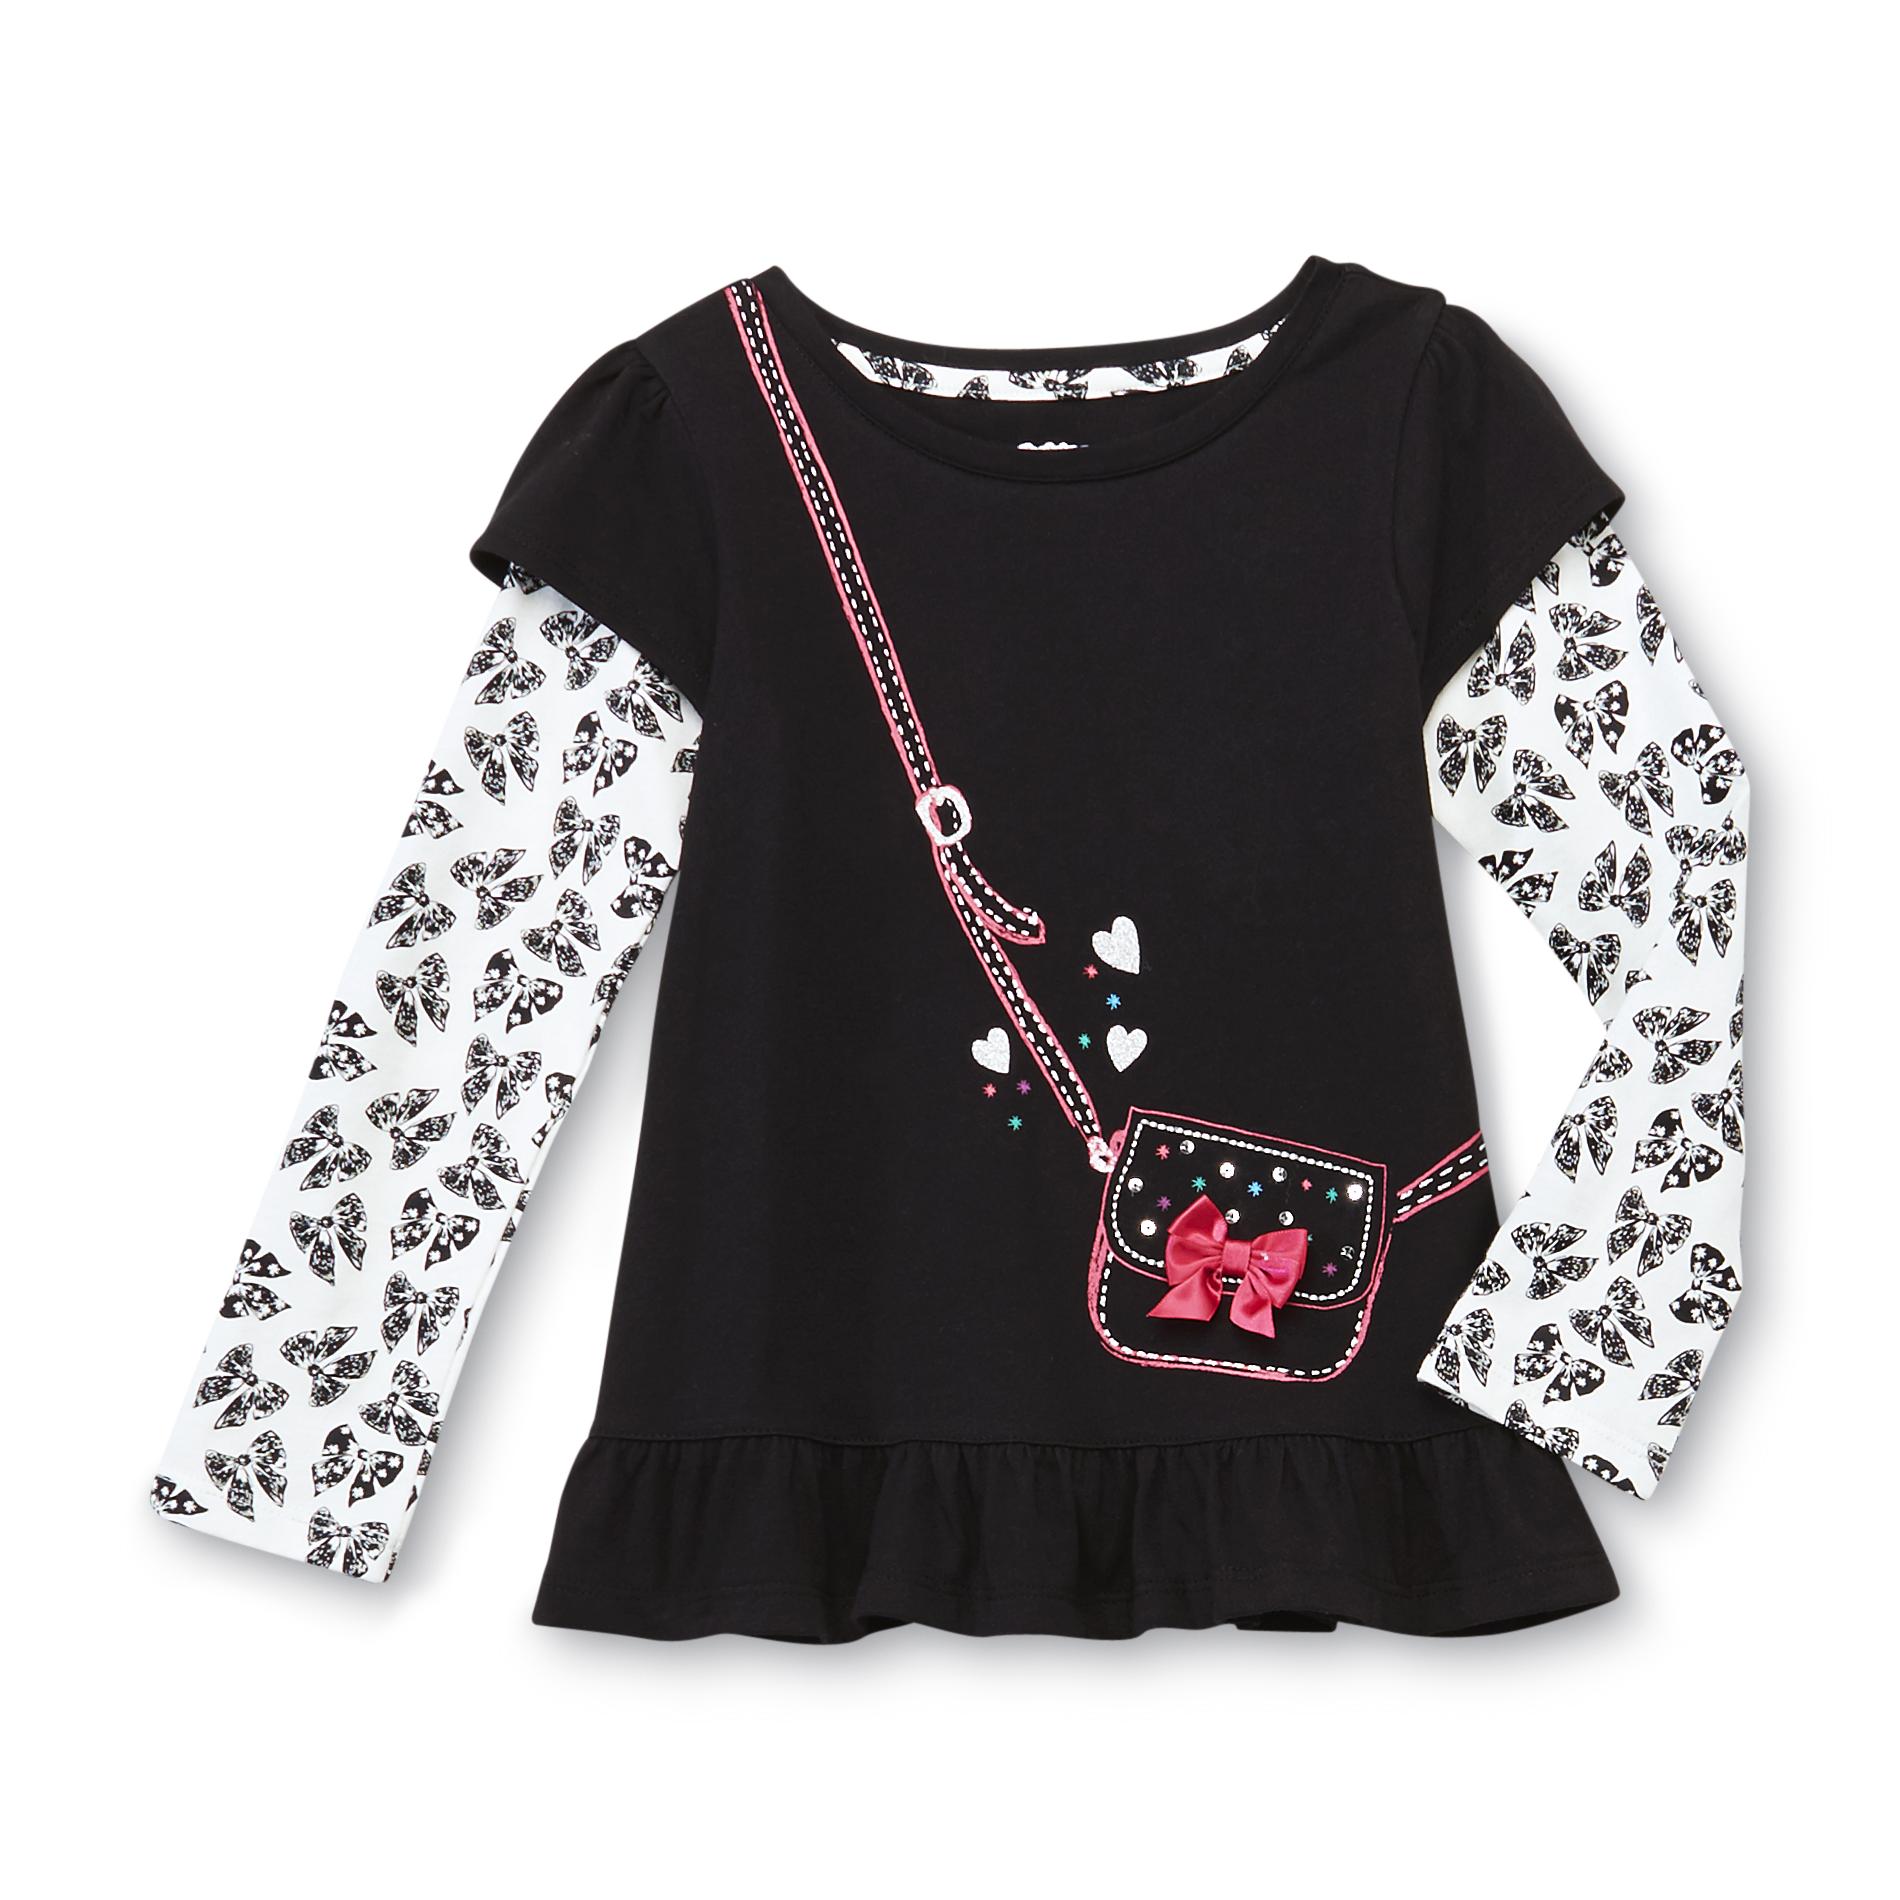 Toughskins Infant & Toddler Girl's Long-Sleeve Tunic Top - Bows & Hearts